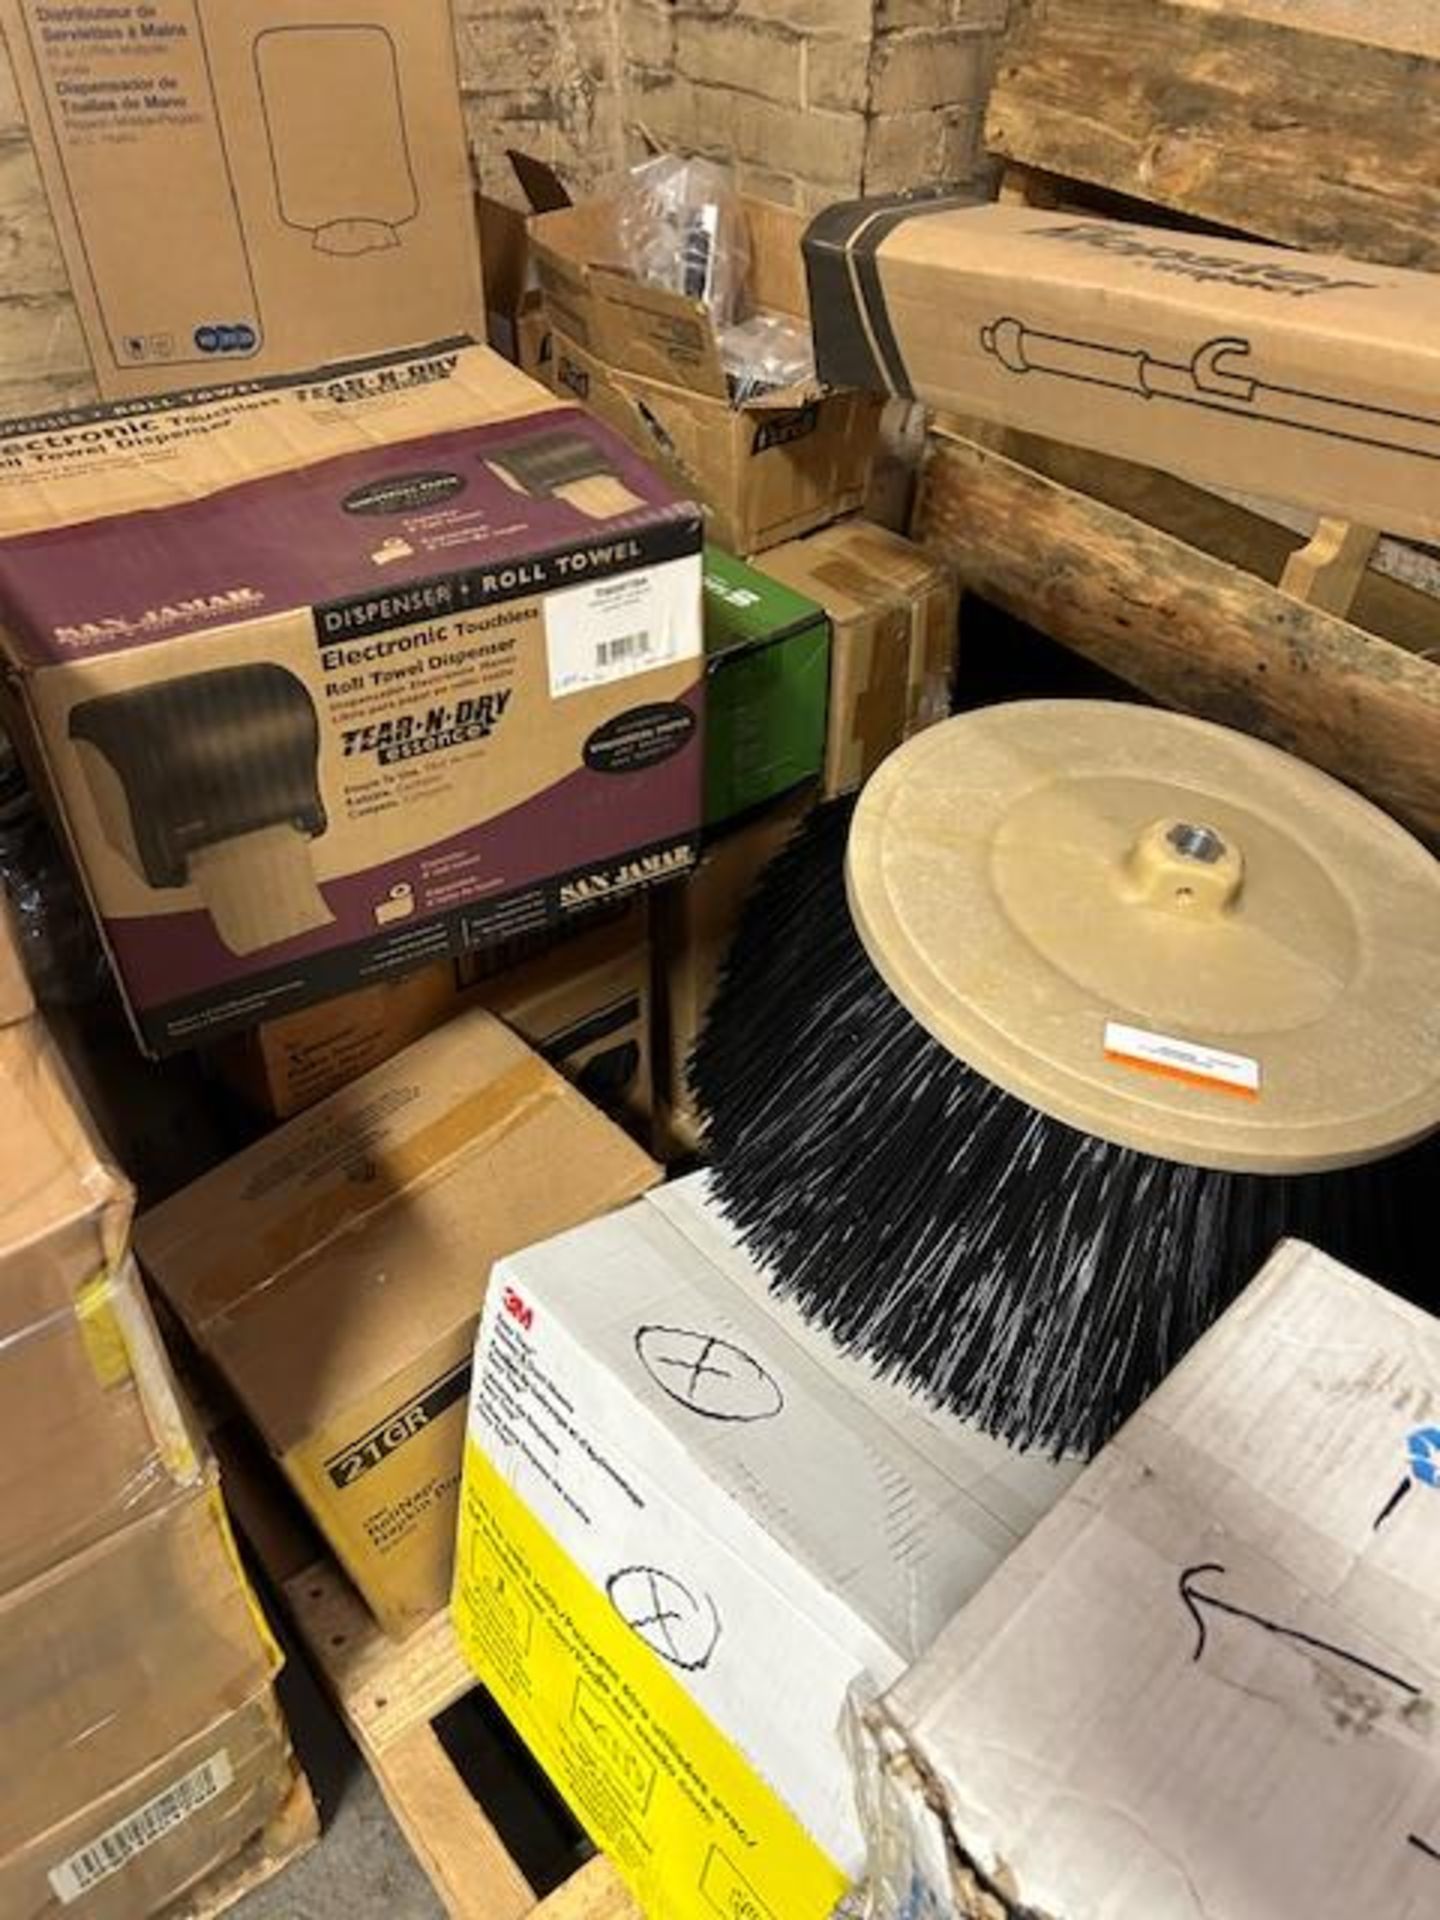 LOT - (2) Skids of Janitorial Supplies, (1) Heavy Duty Garbage Can, Dispensers, Dust Cloths and - Image 2 of 5